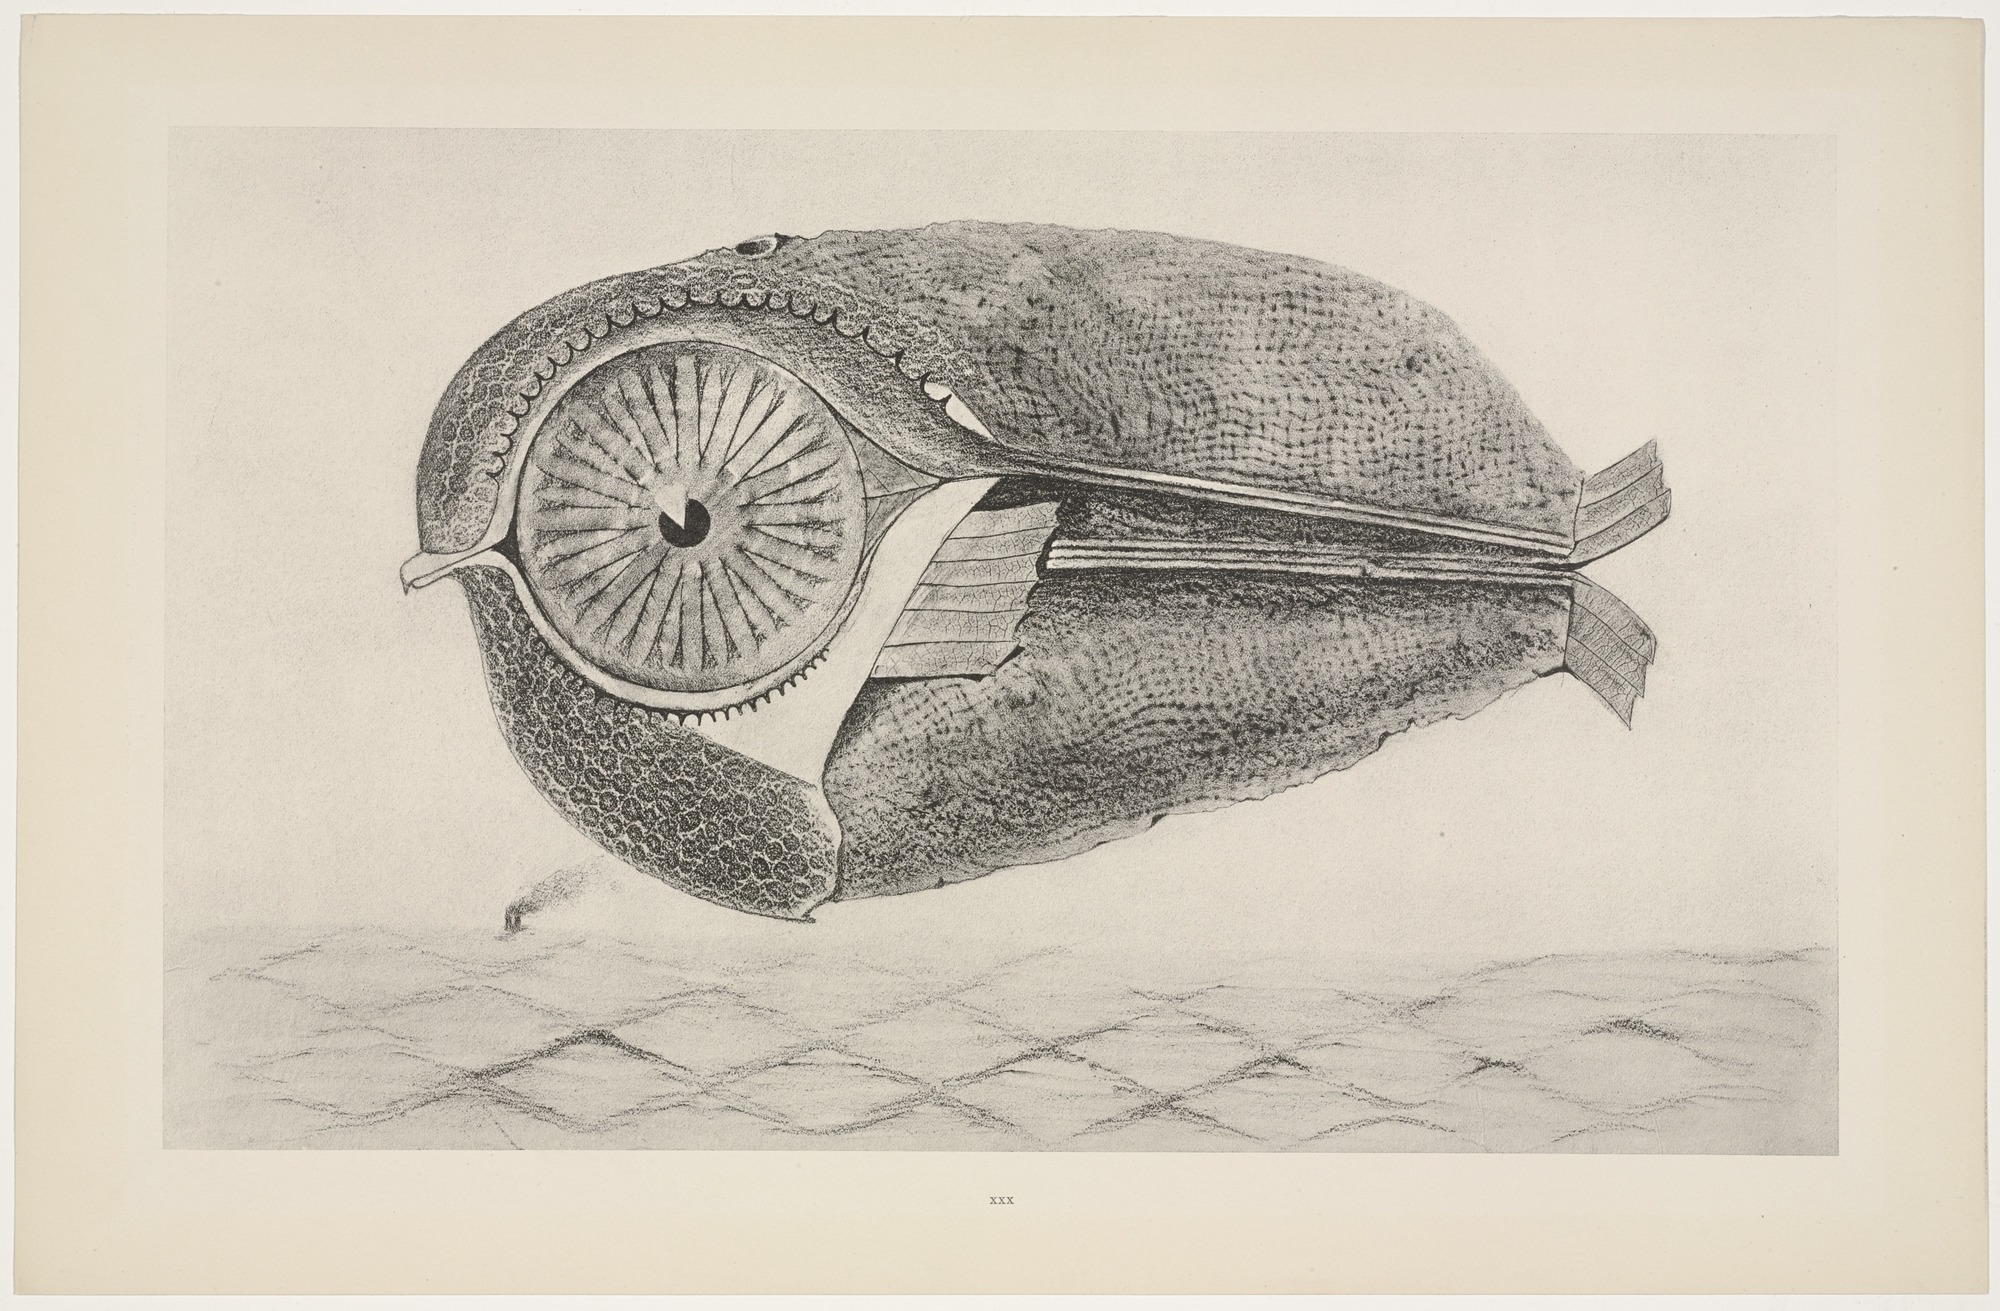 Max Ernst,The Fugitive from Natural History, published 1926 (MoMA)